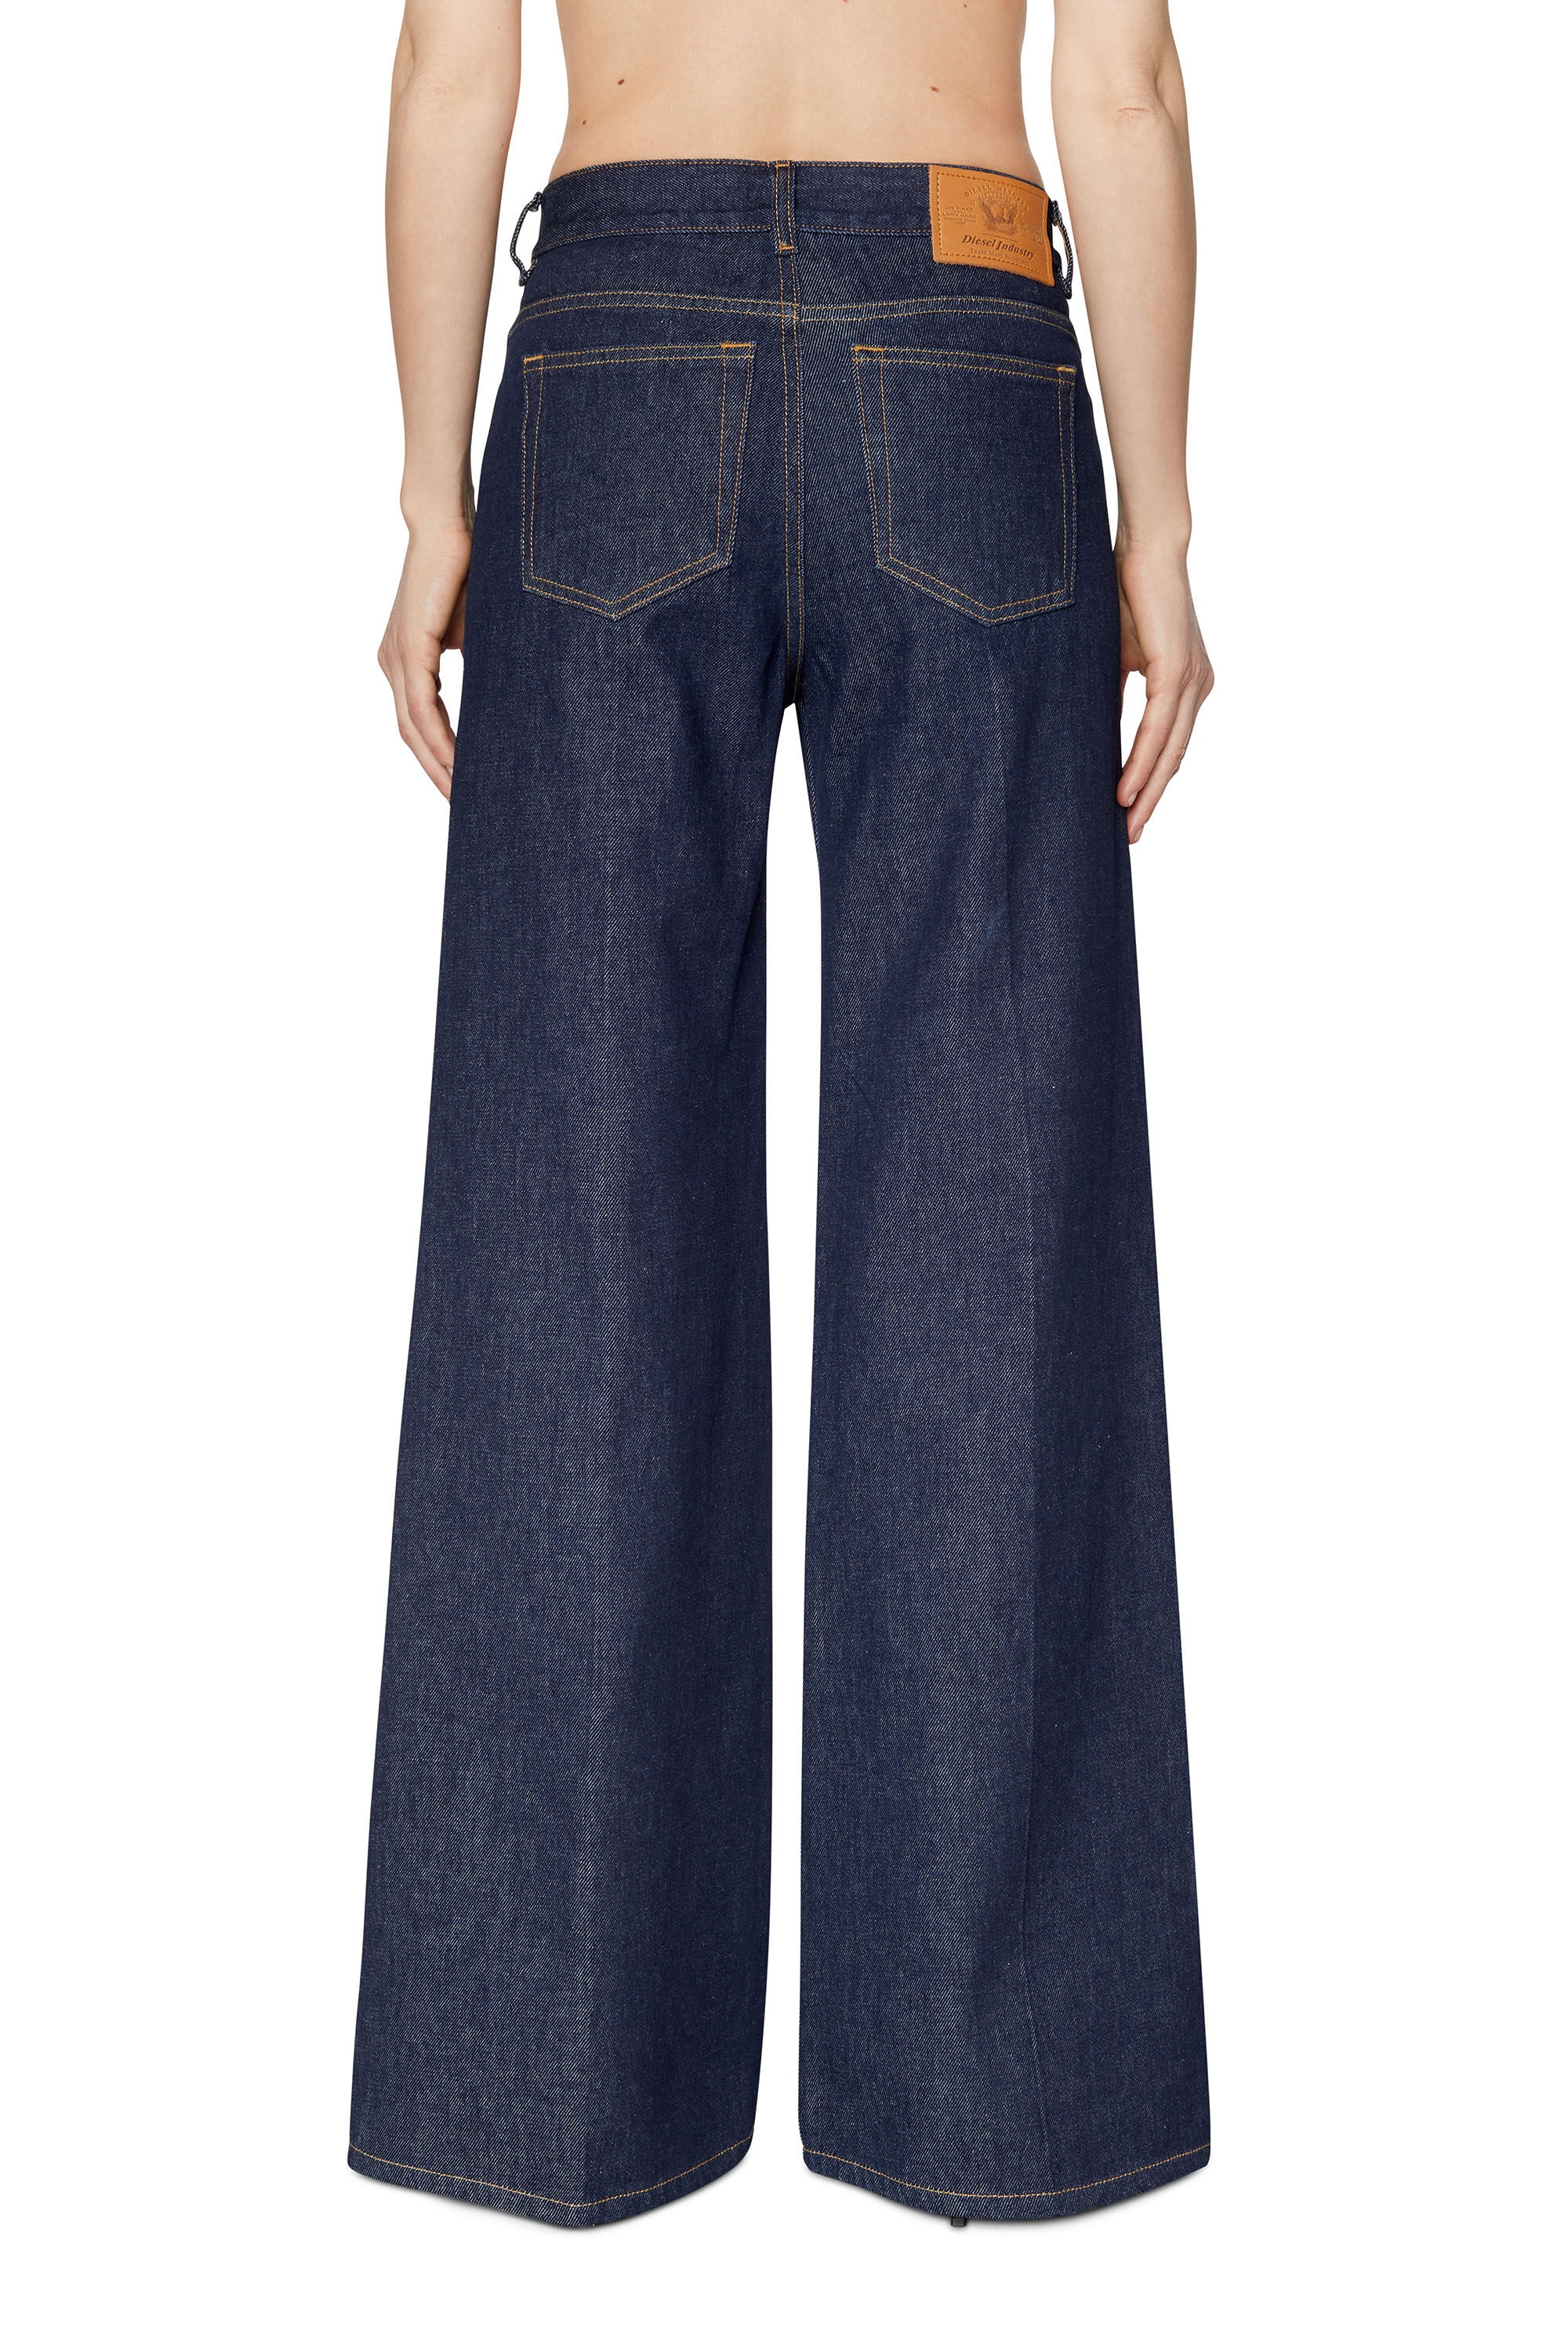 BOOTCUT AND FLARE JEANS 1978 D-AKEMI Z9C02 - 5